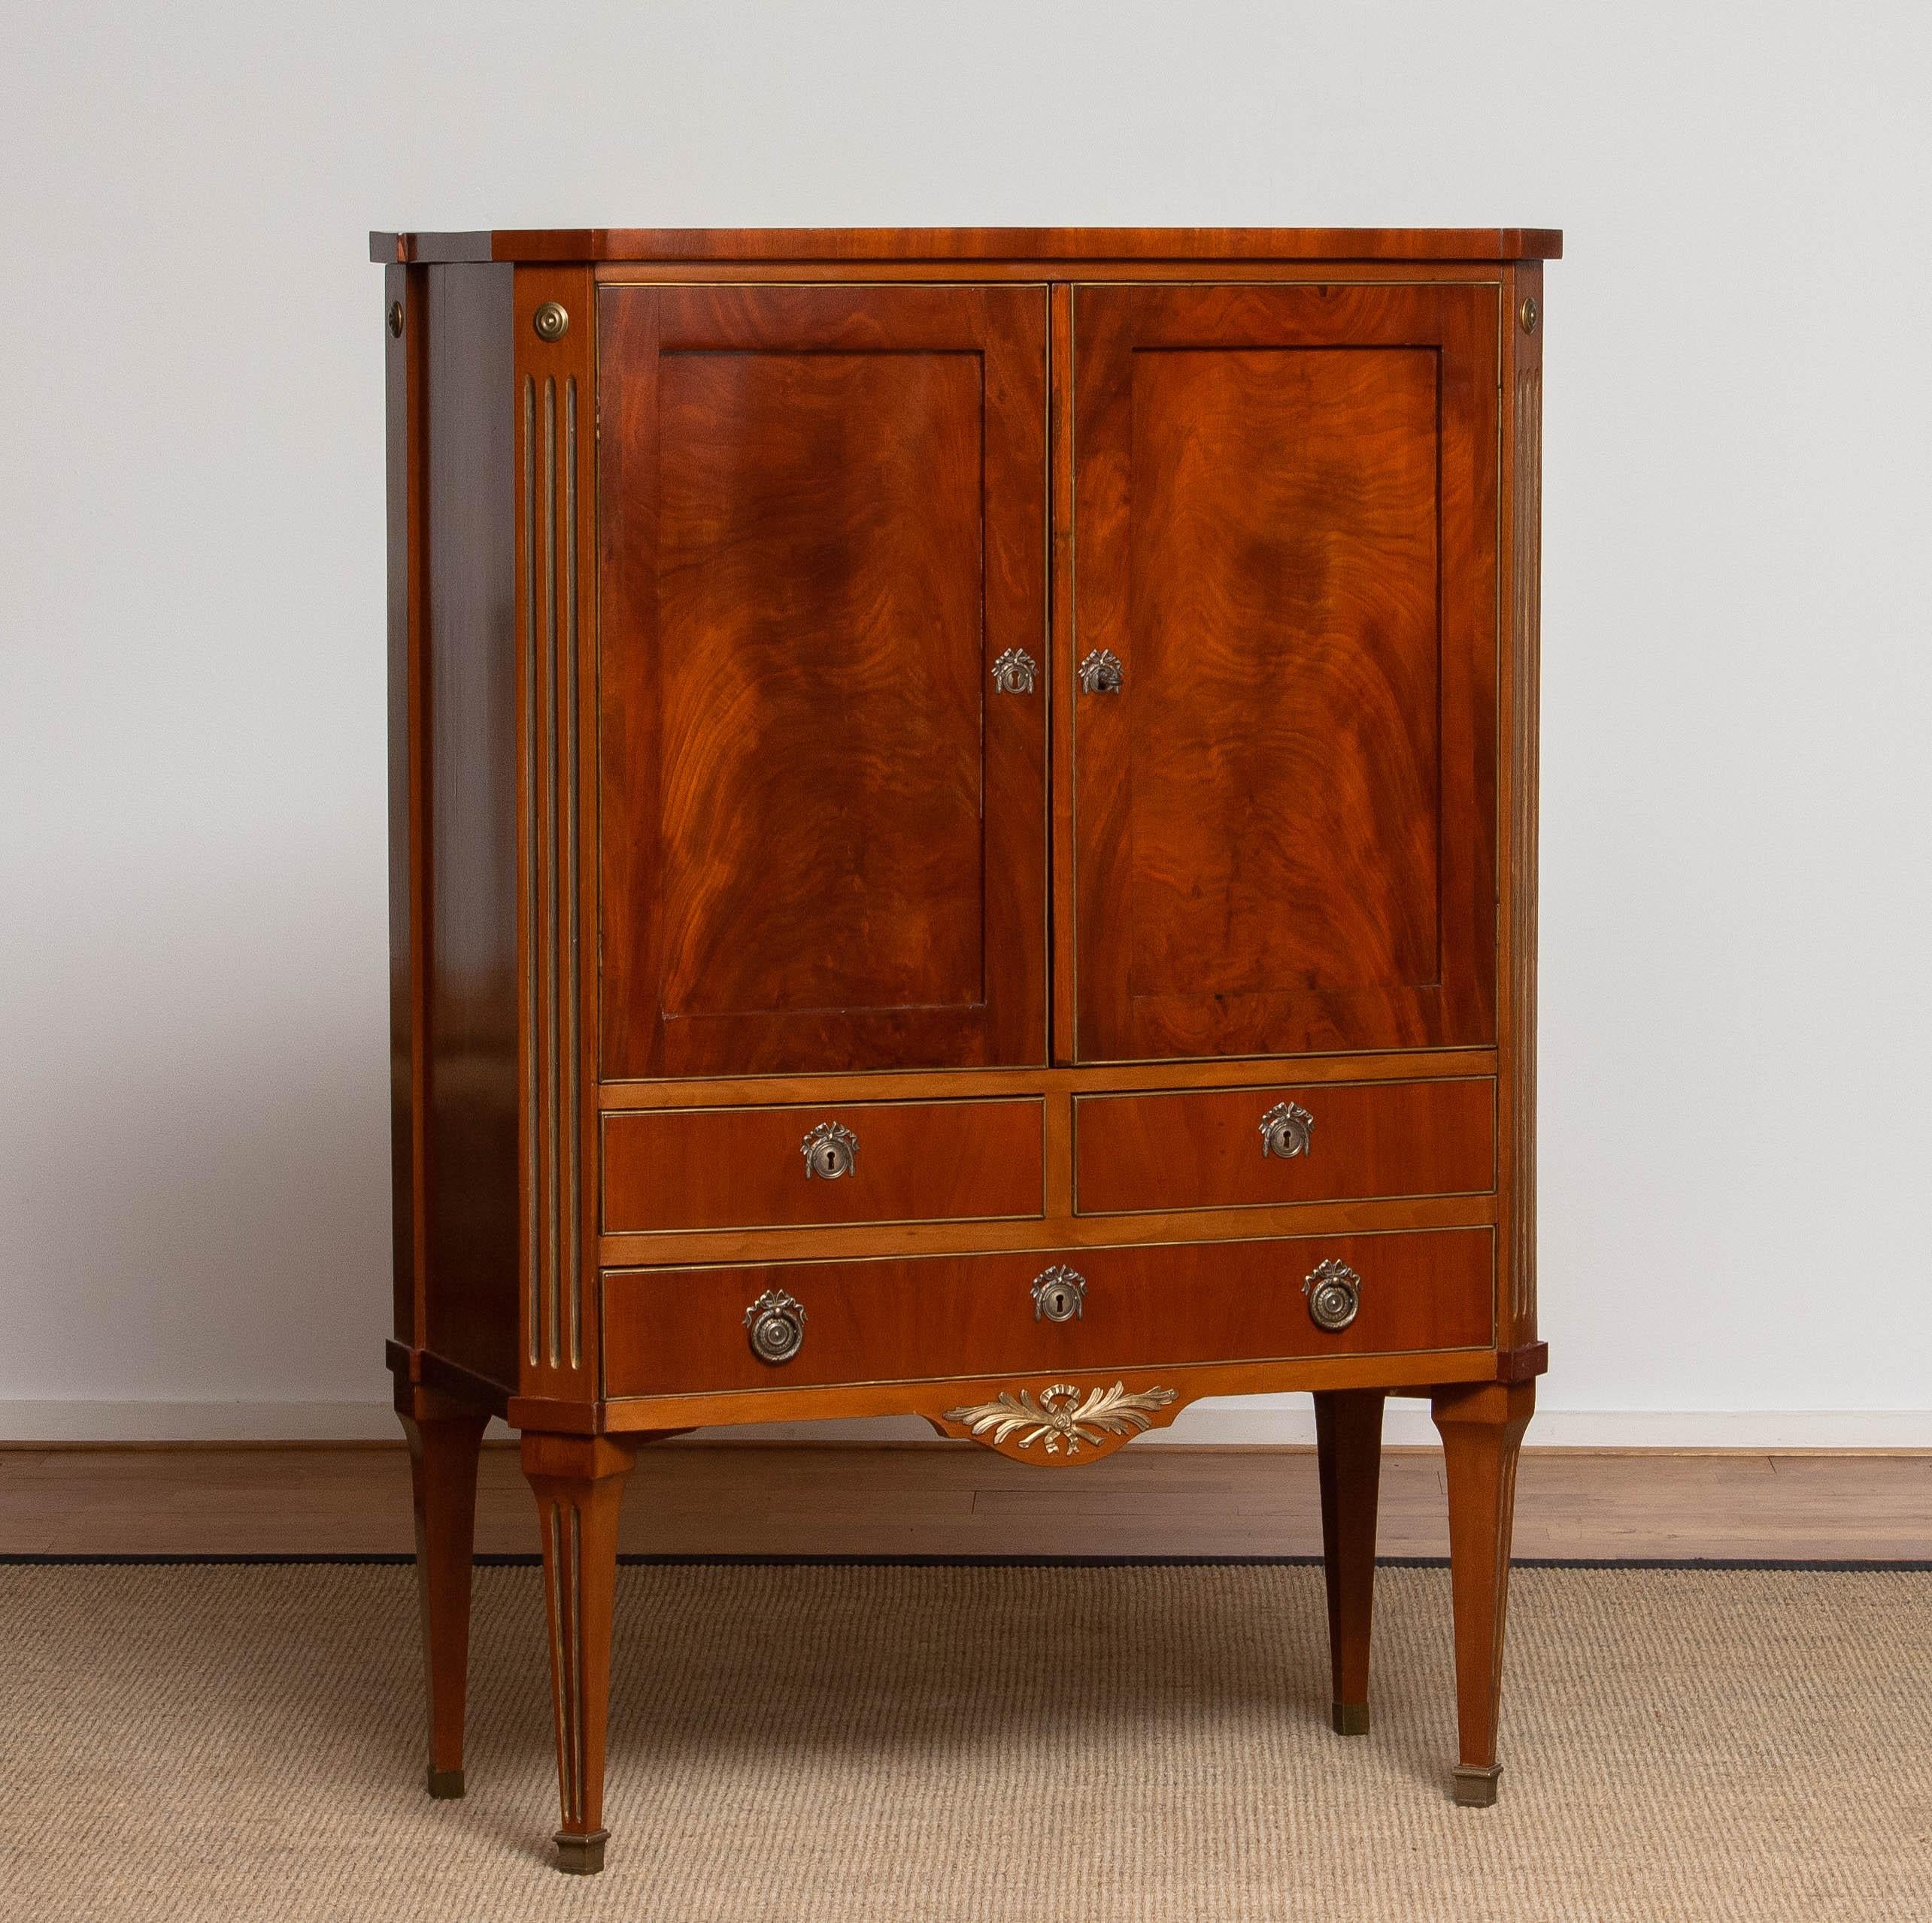 Beautiful and slim mahogany veneered, pine, Gustav / Louis XVI cabinet with brass inlay and mounted details build by craftsmen in Baltic / Swedish regions early 18th century. 
Allover this cabinet is in good condition and is steady on her legs.